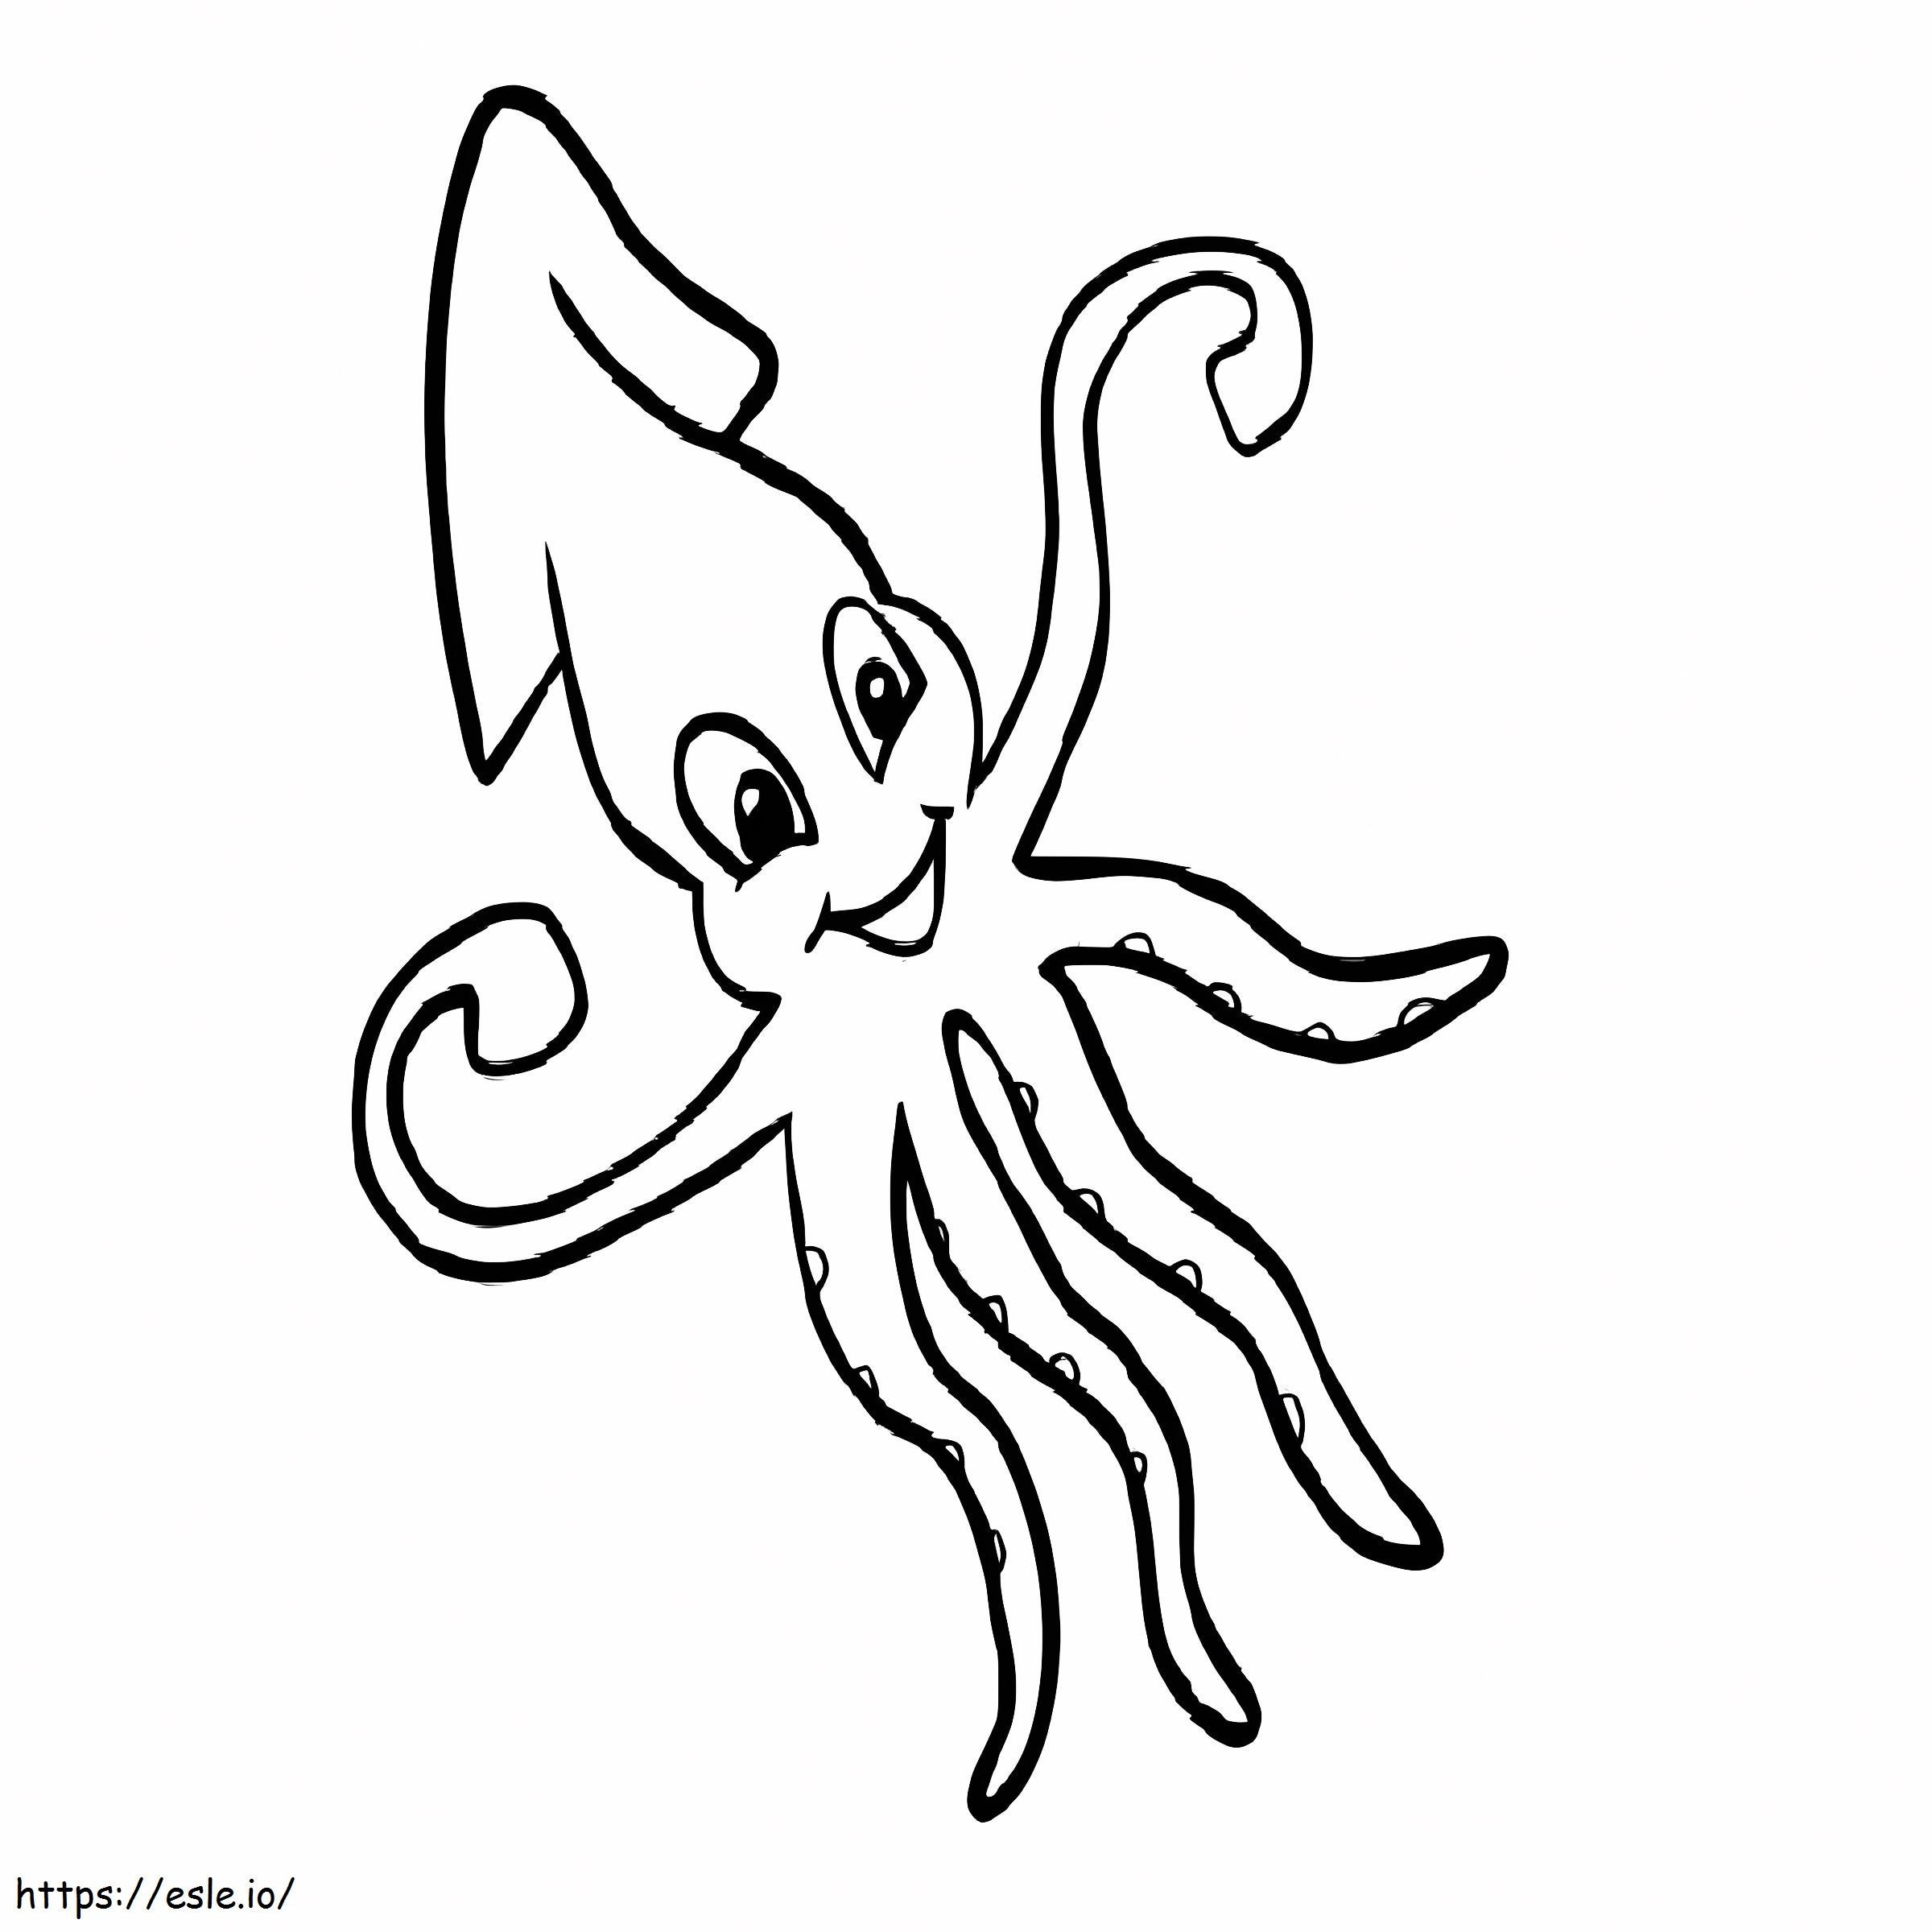 Funny Squid coloring page